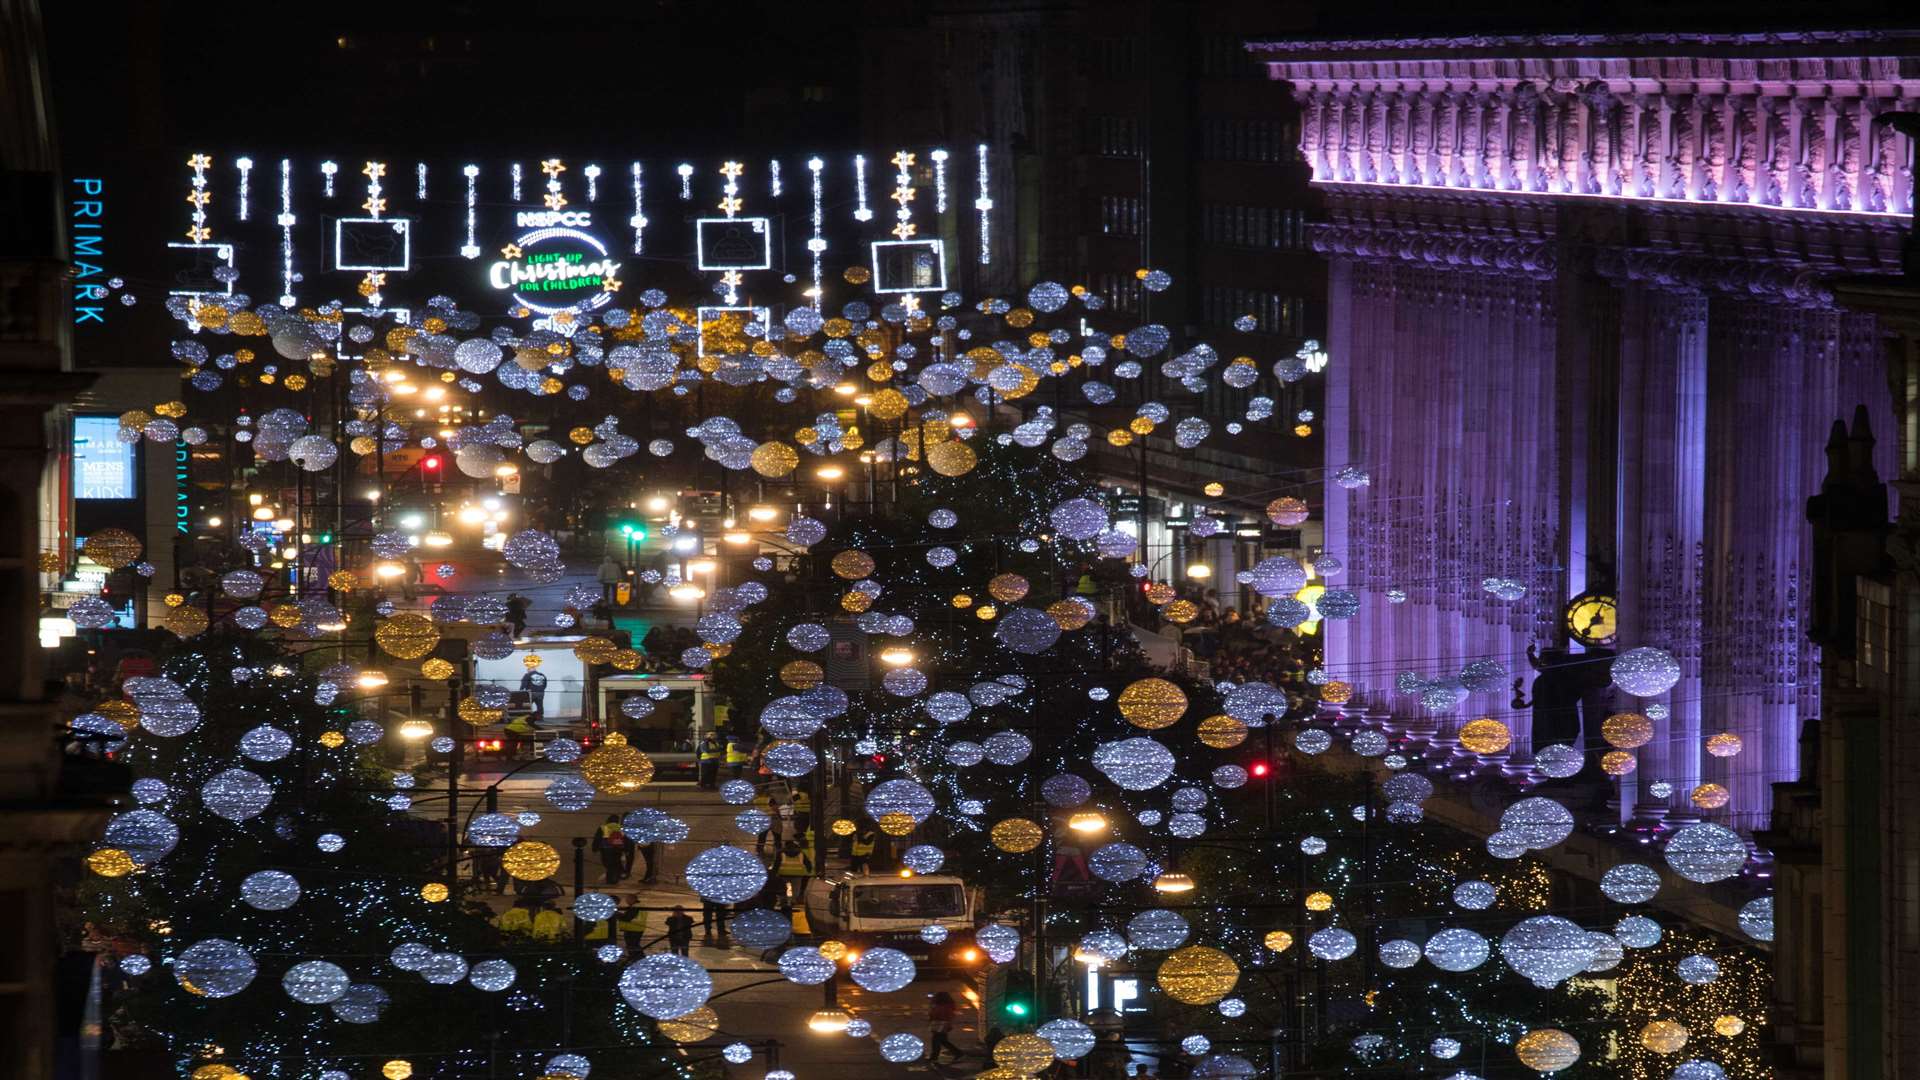 There are more than 750,000 bright white LED bulbs and 1,778 baubles in the Oxford Street Christmas lights